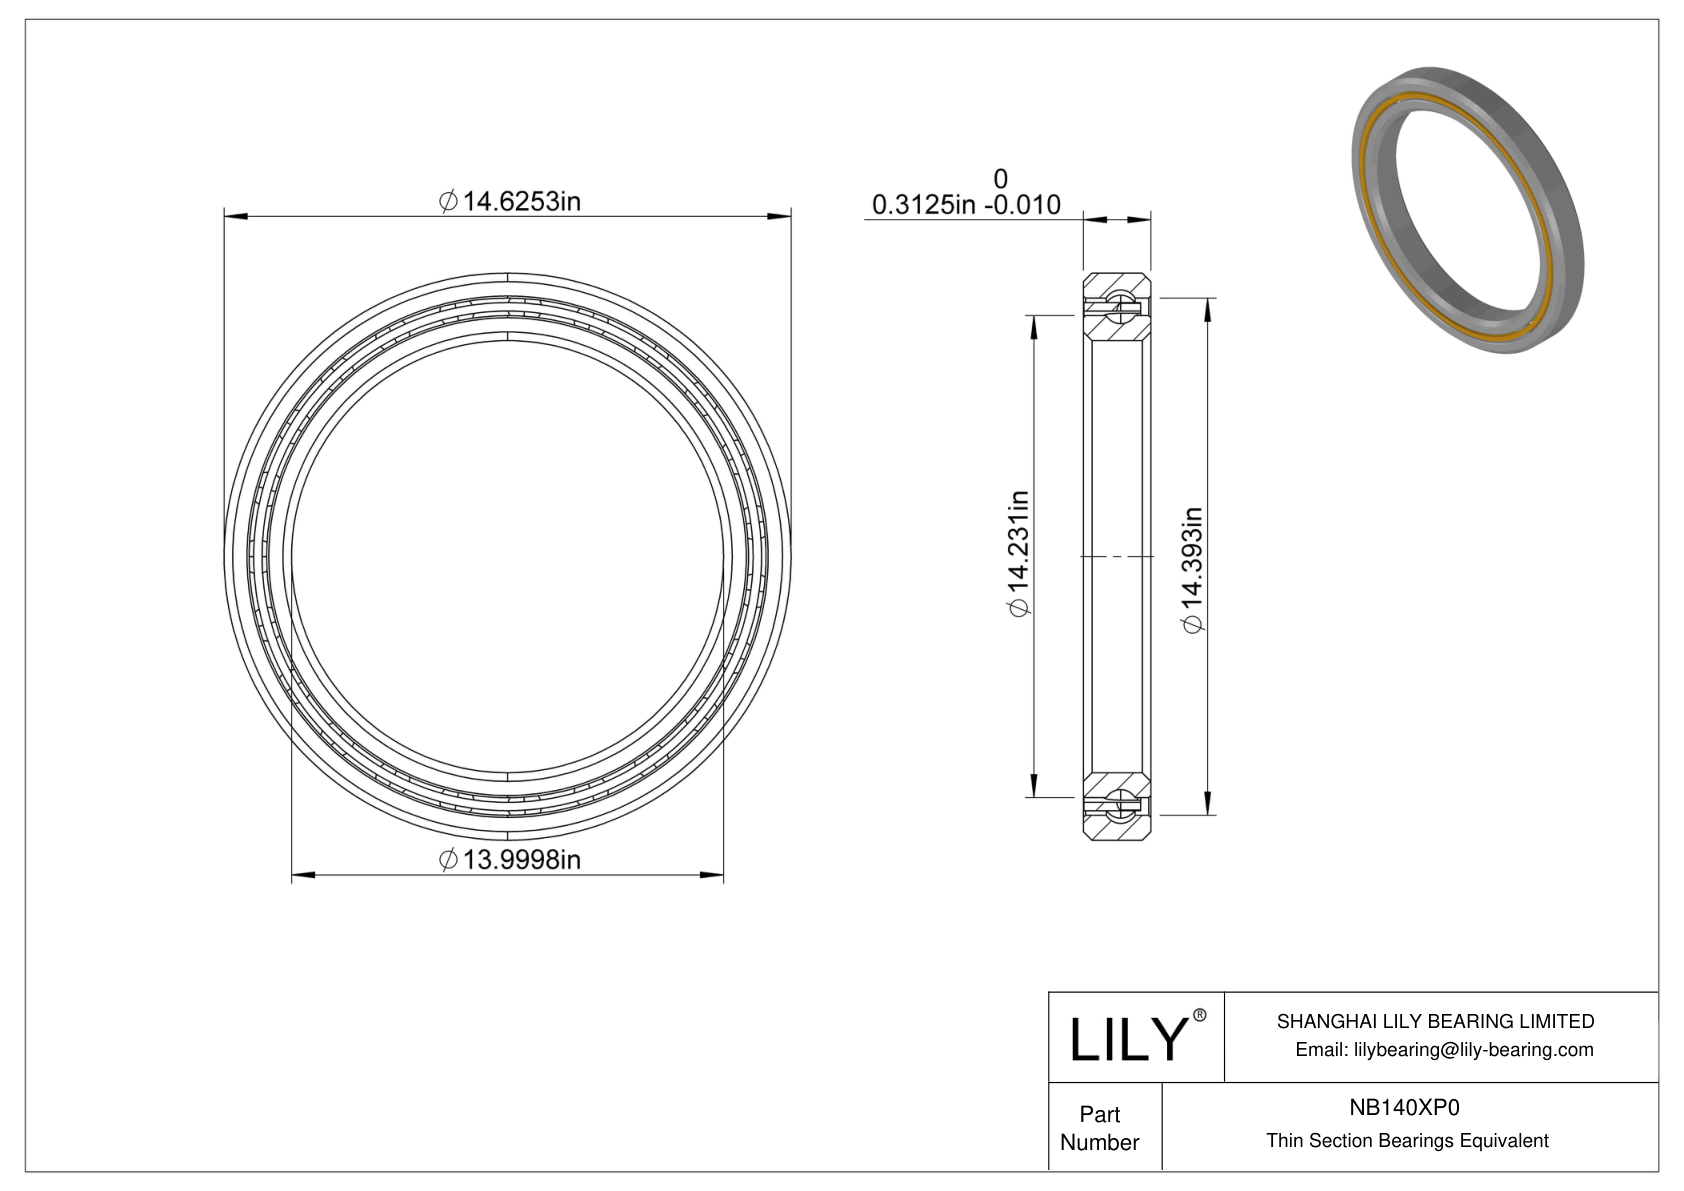 NB140XP0 Constant Section (CS) Bearings cad drawing